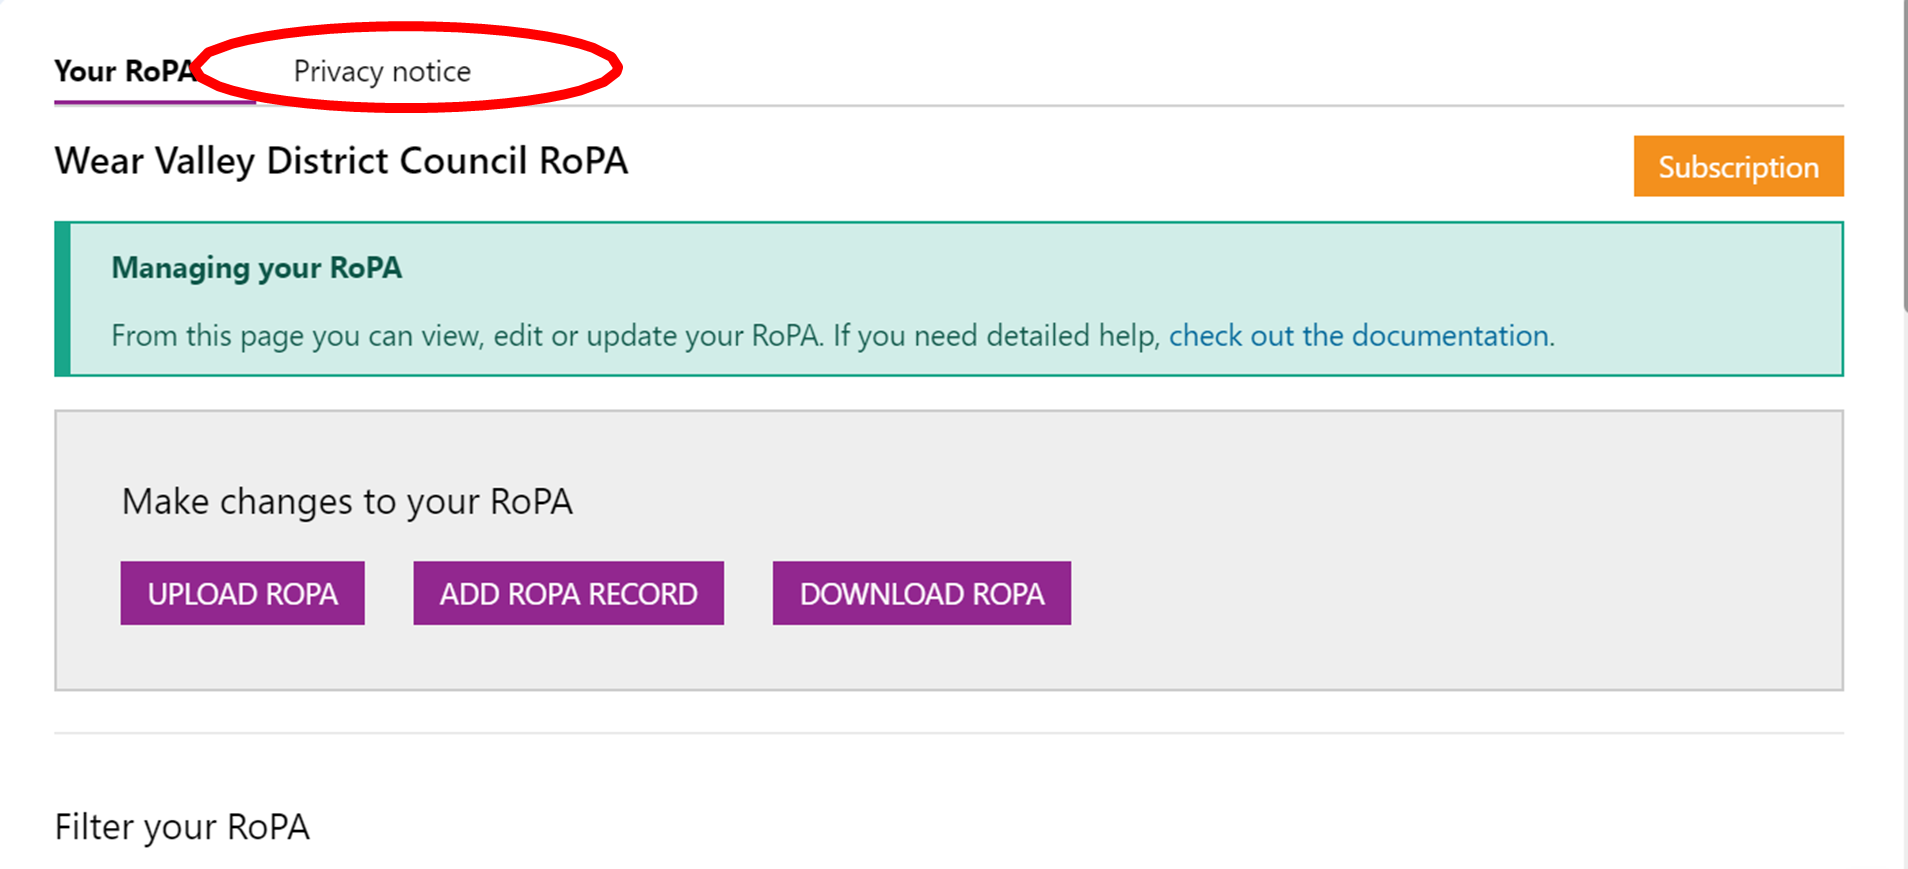 A screenshot of the RoPA application